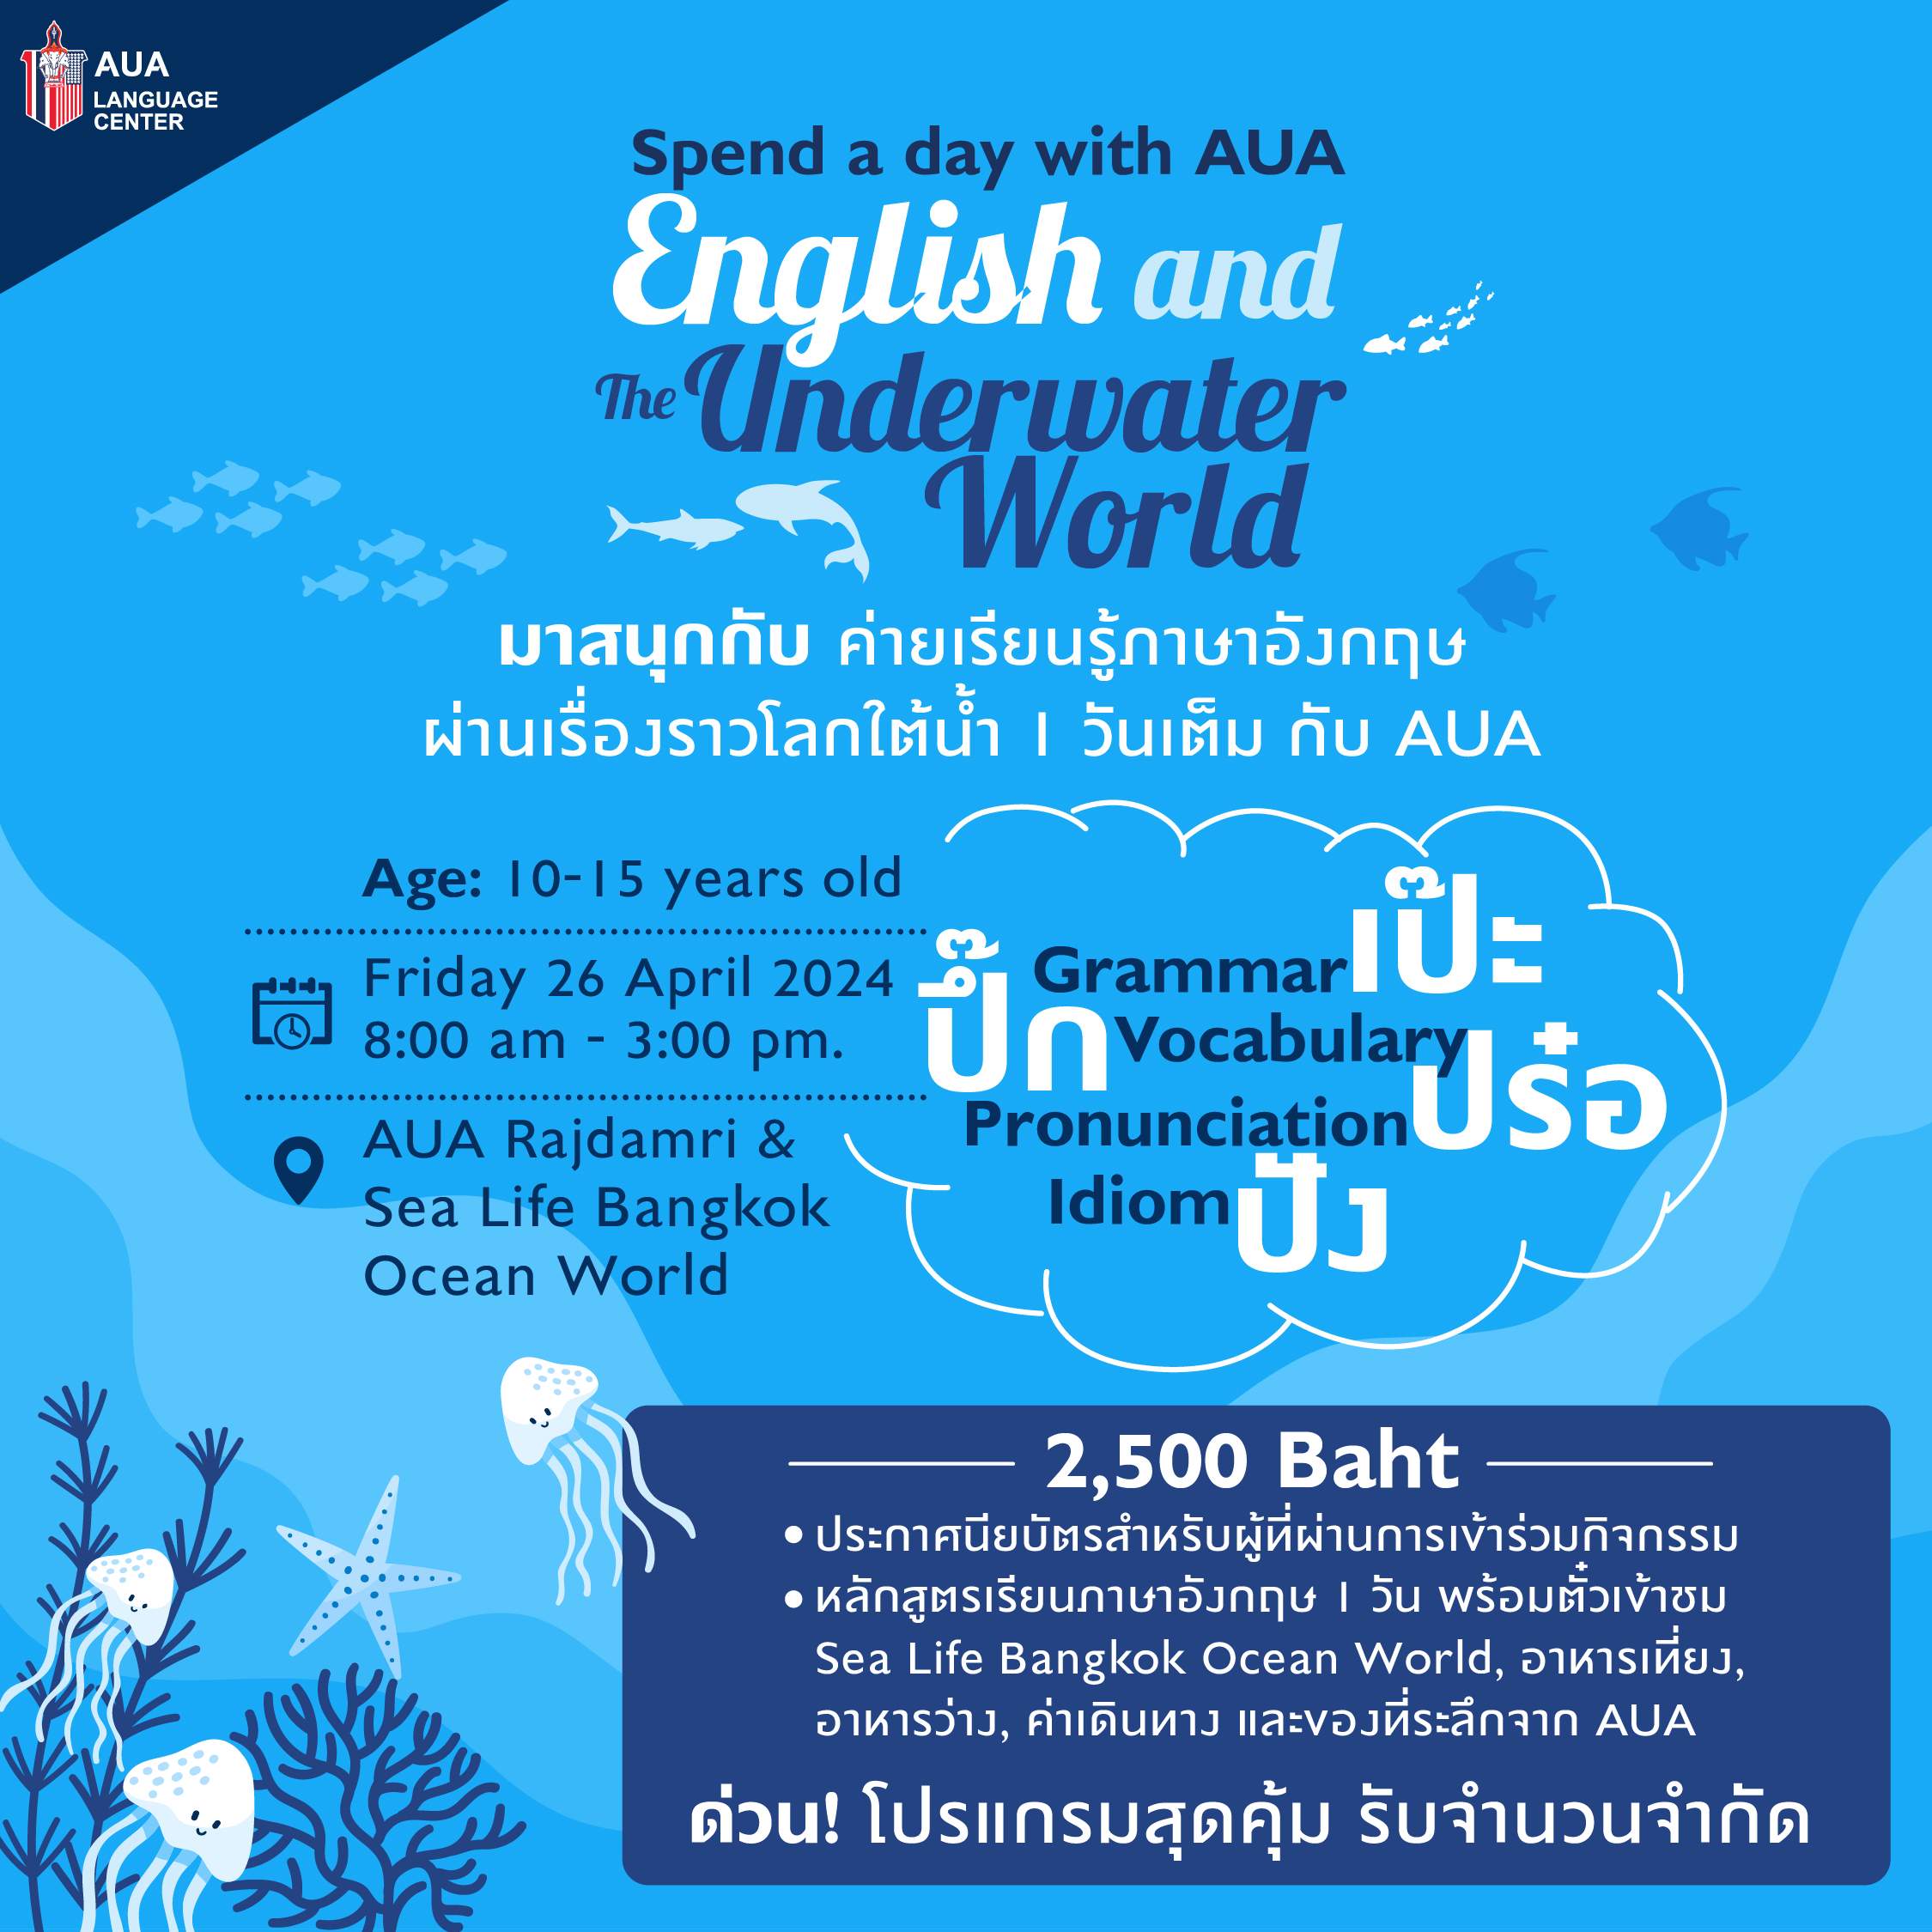 Spend a day with AUA: English and The Underwater World